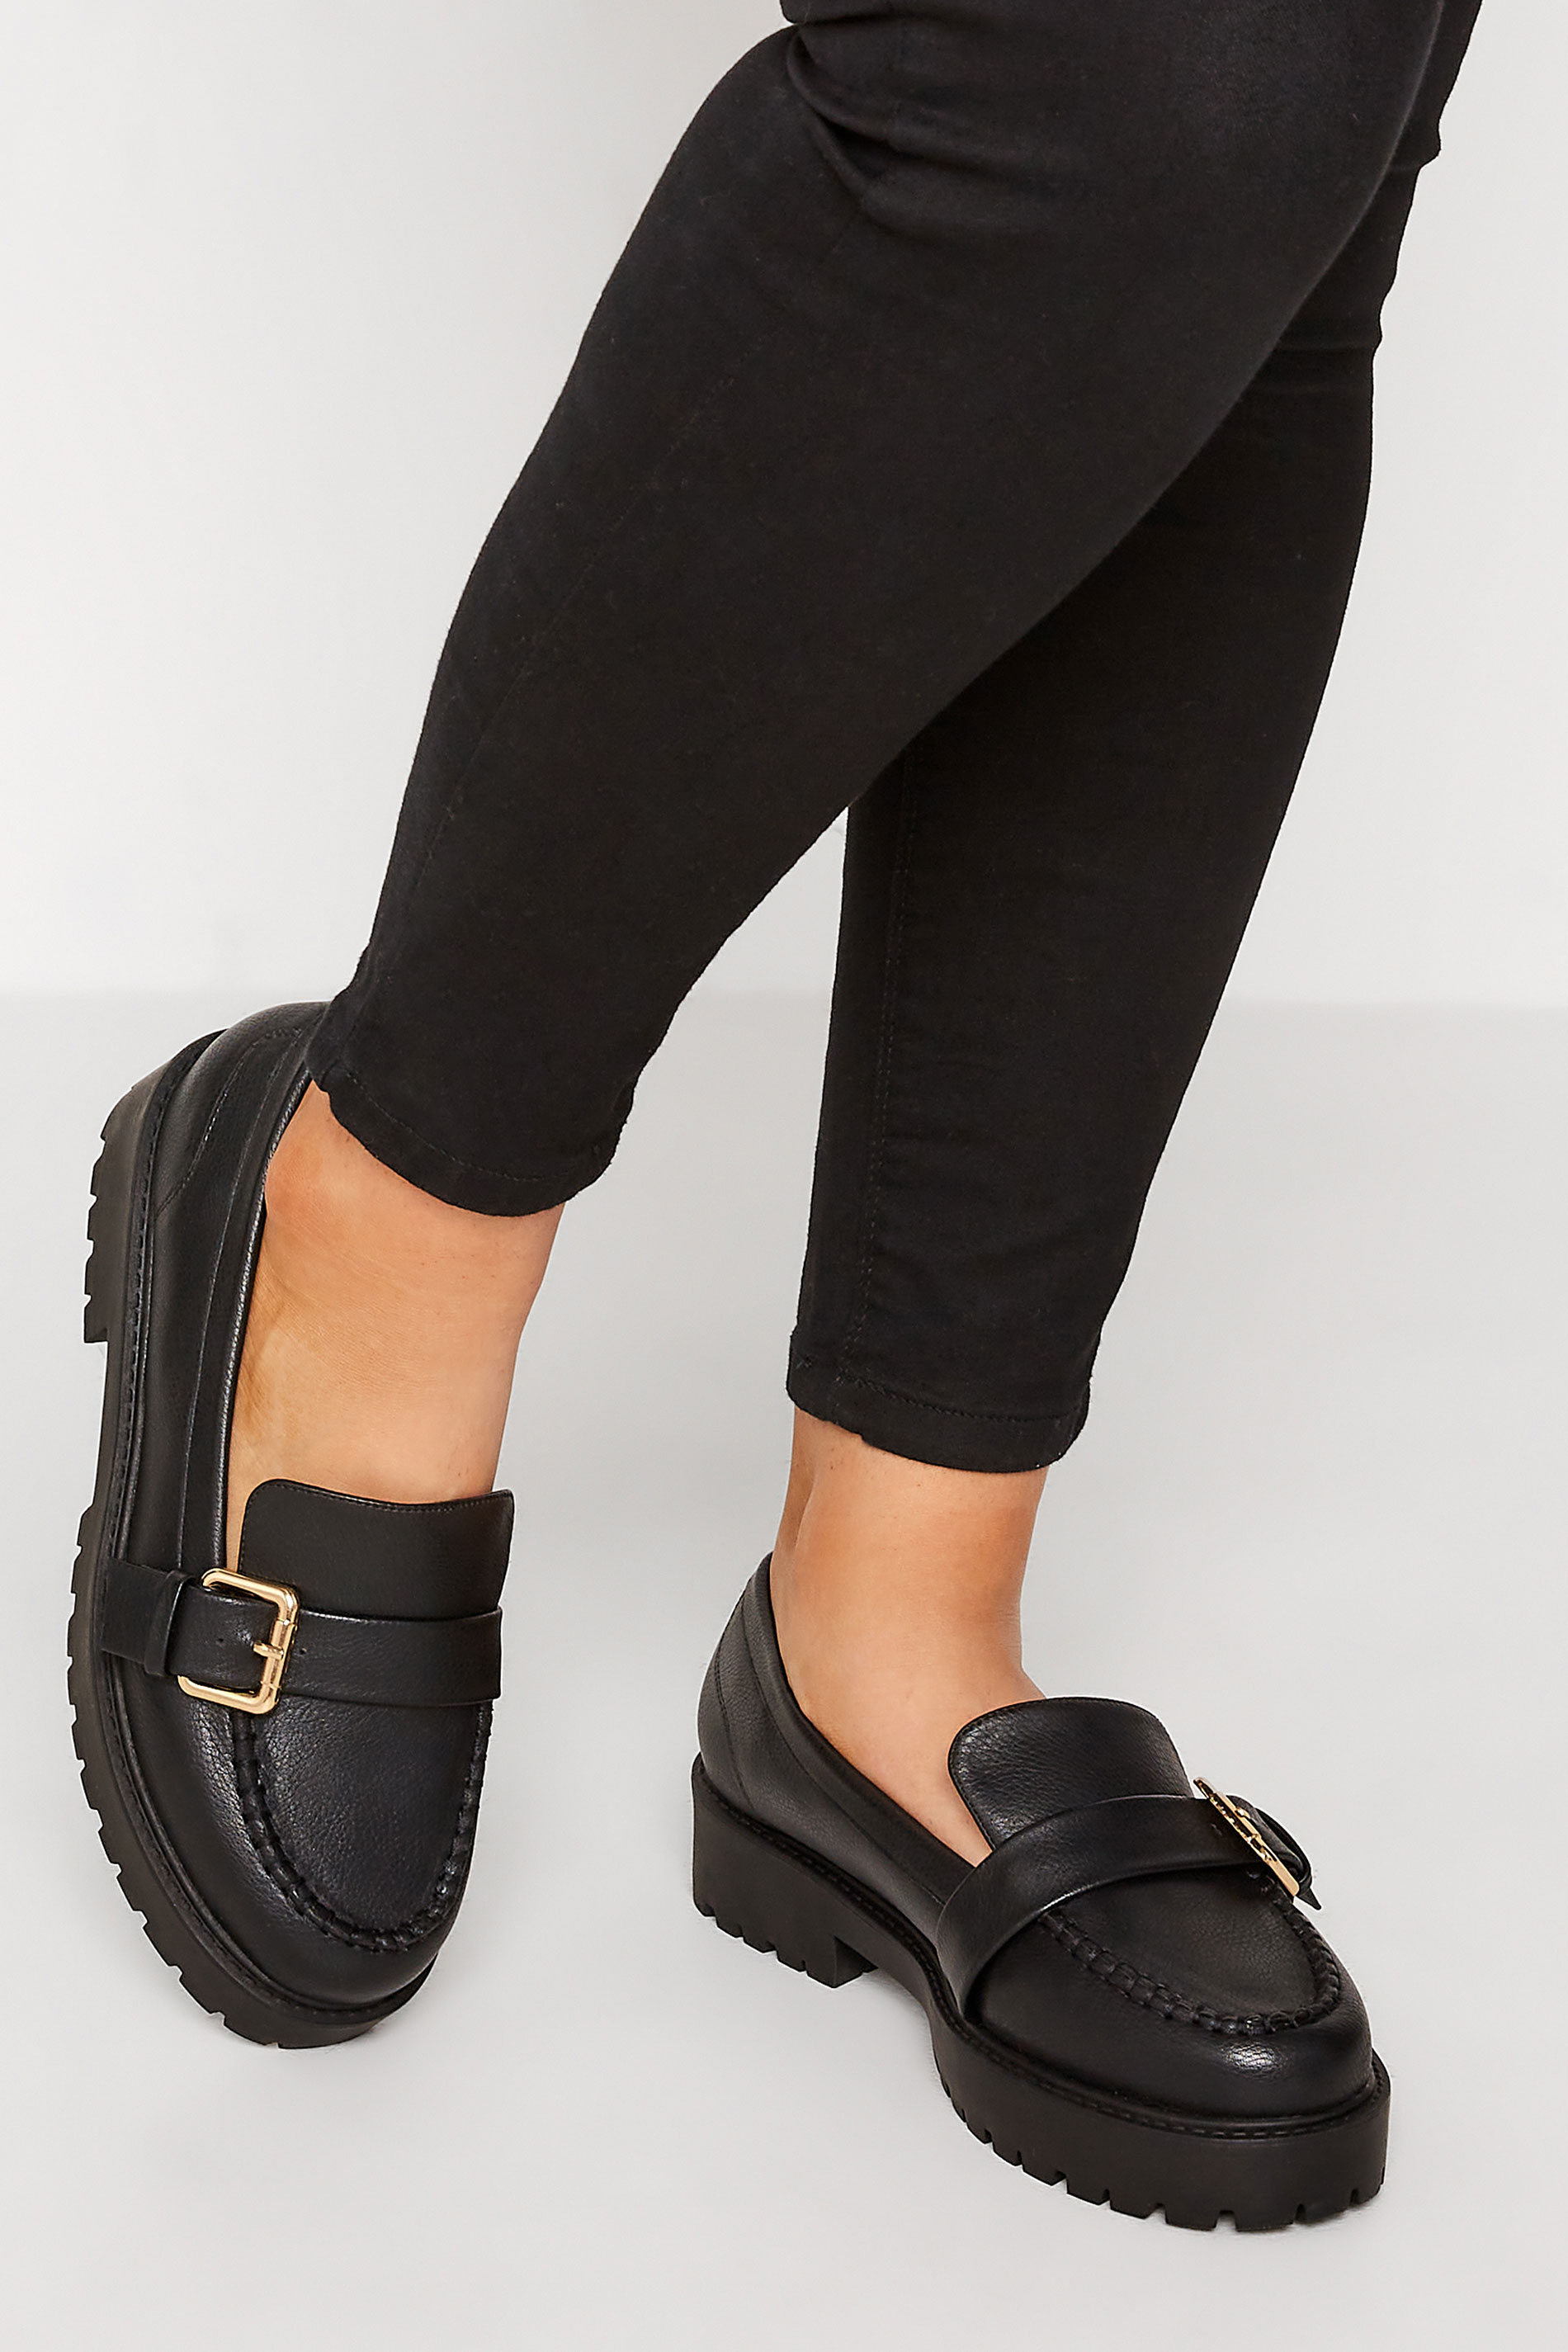 Black Buckle Chunky Loafers In Extra Wide EEE Fit 1